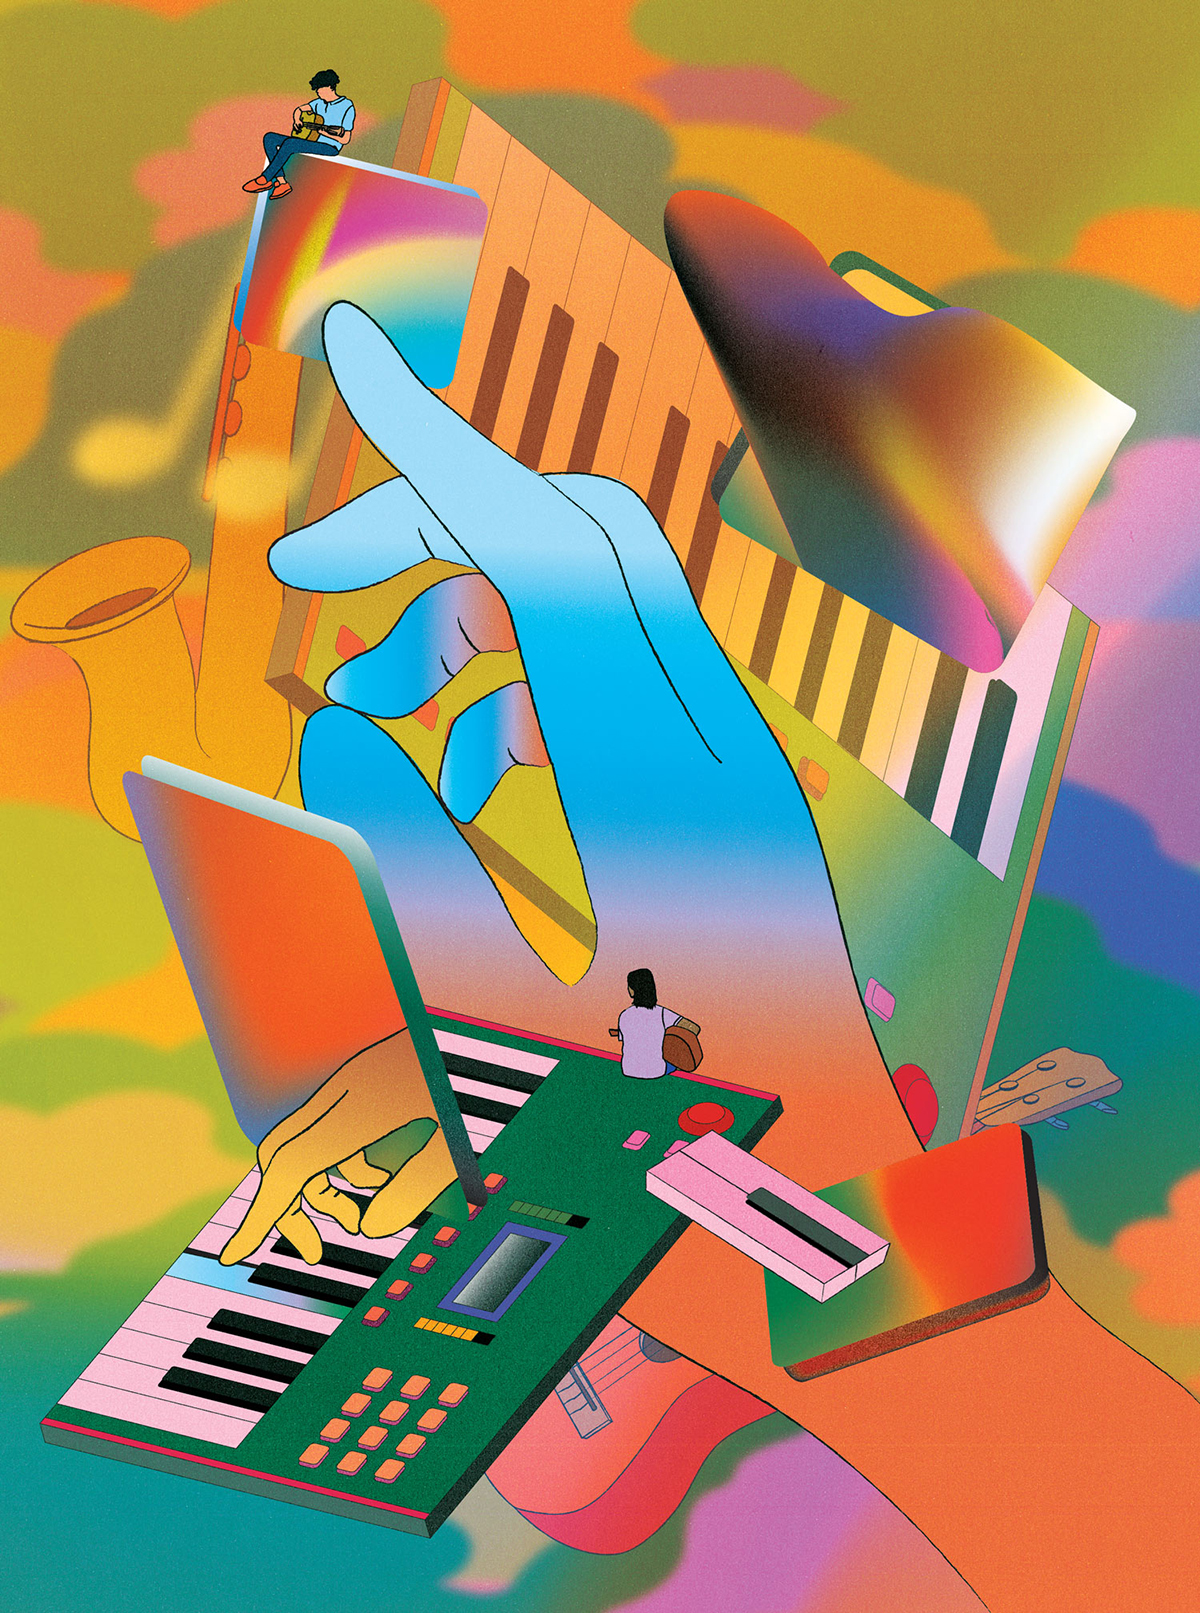 Digitally illustrated collage of musical instruments, mobile phone screens and miniature sized musicians playing guitars. A hand is reaching through a mobile phone screen to press a key on the keyboard.